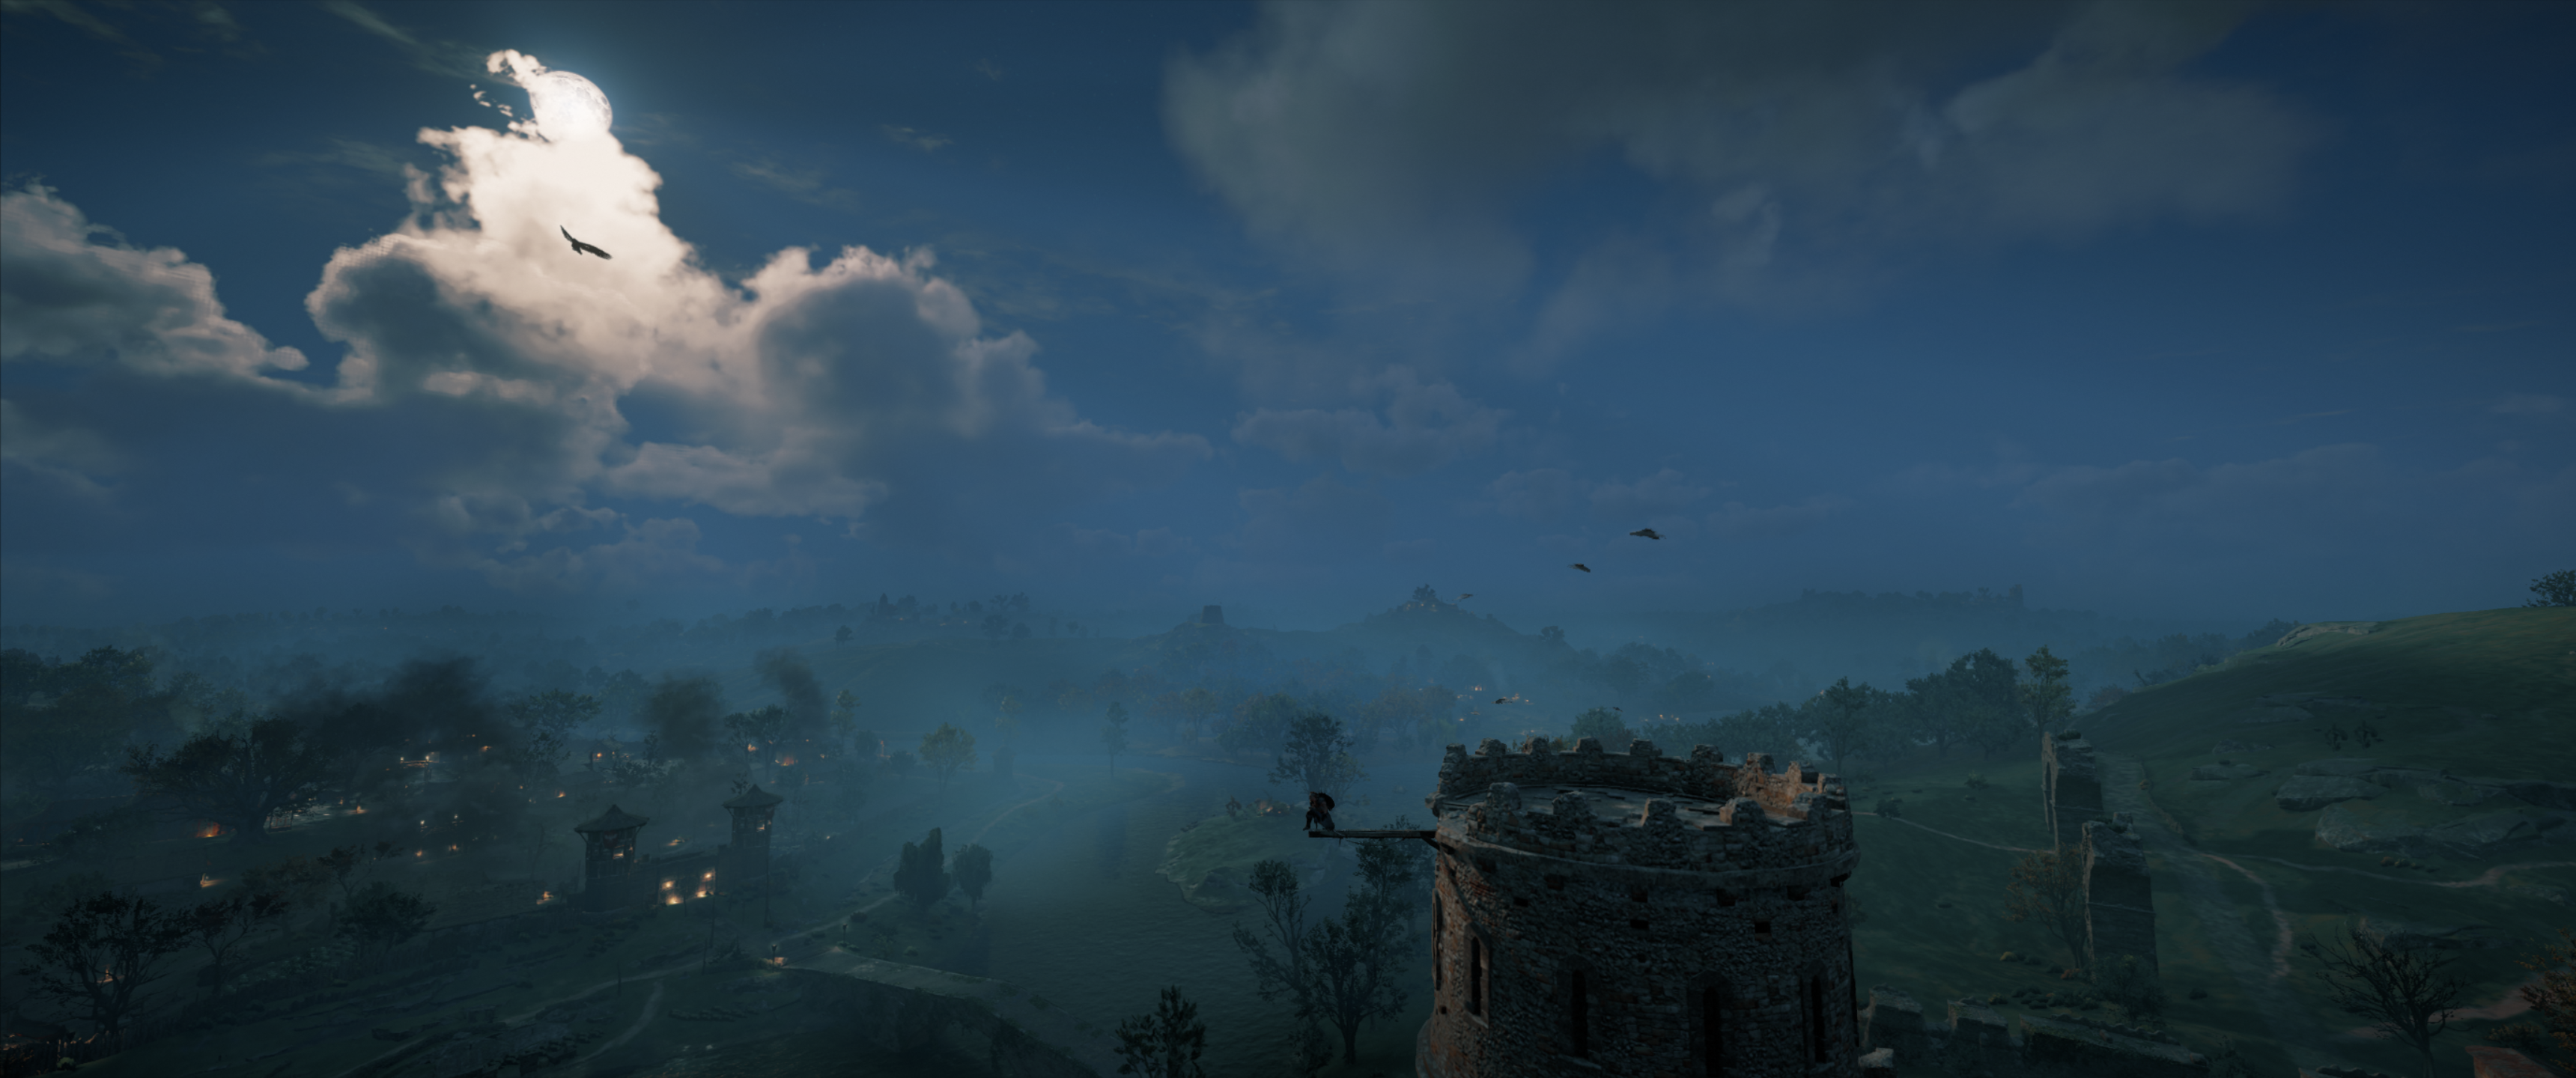 General 3440x1440 Assassin's Creed Assassin's Creed: Valhalla landscape clouds structure blue trees green